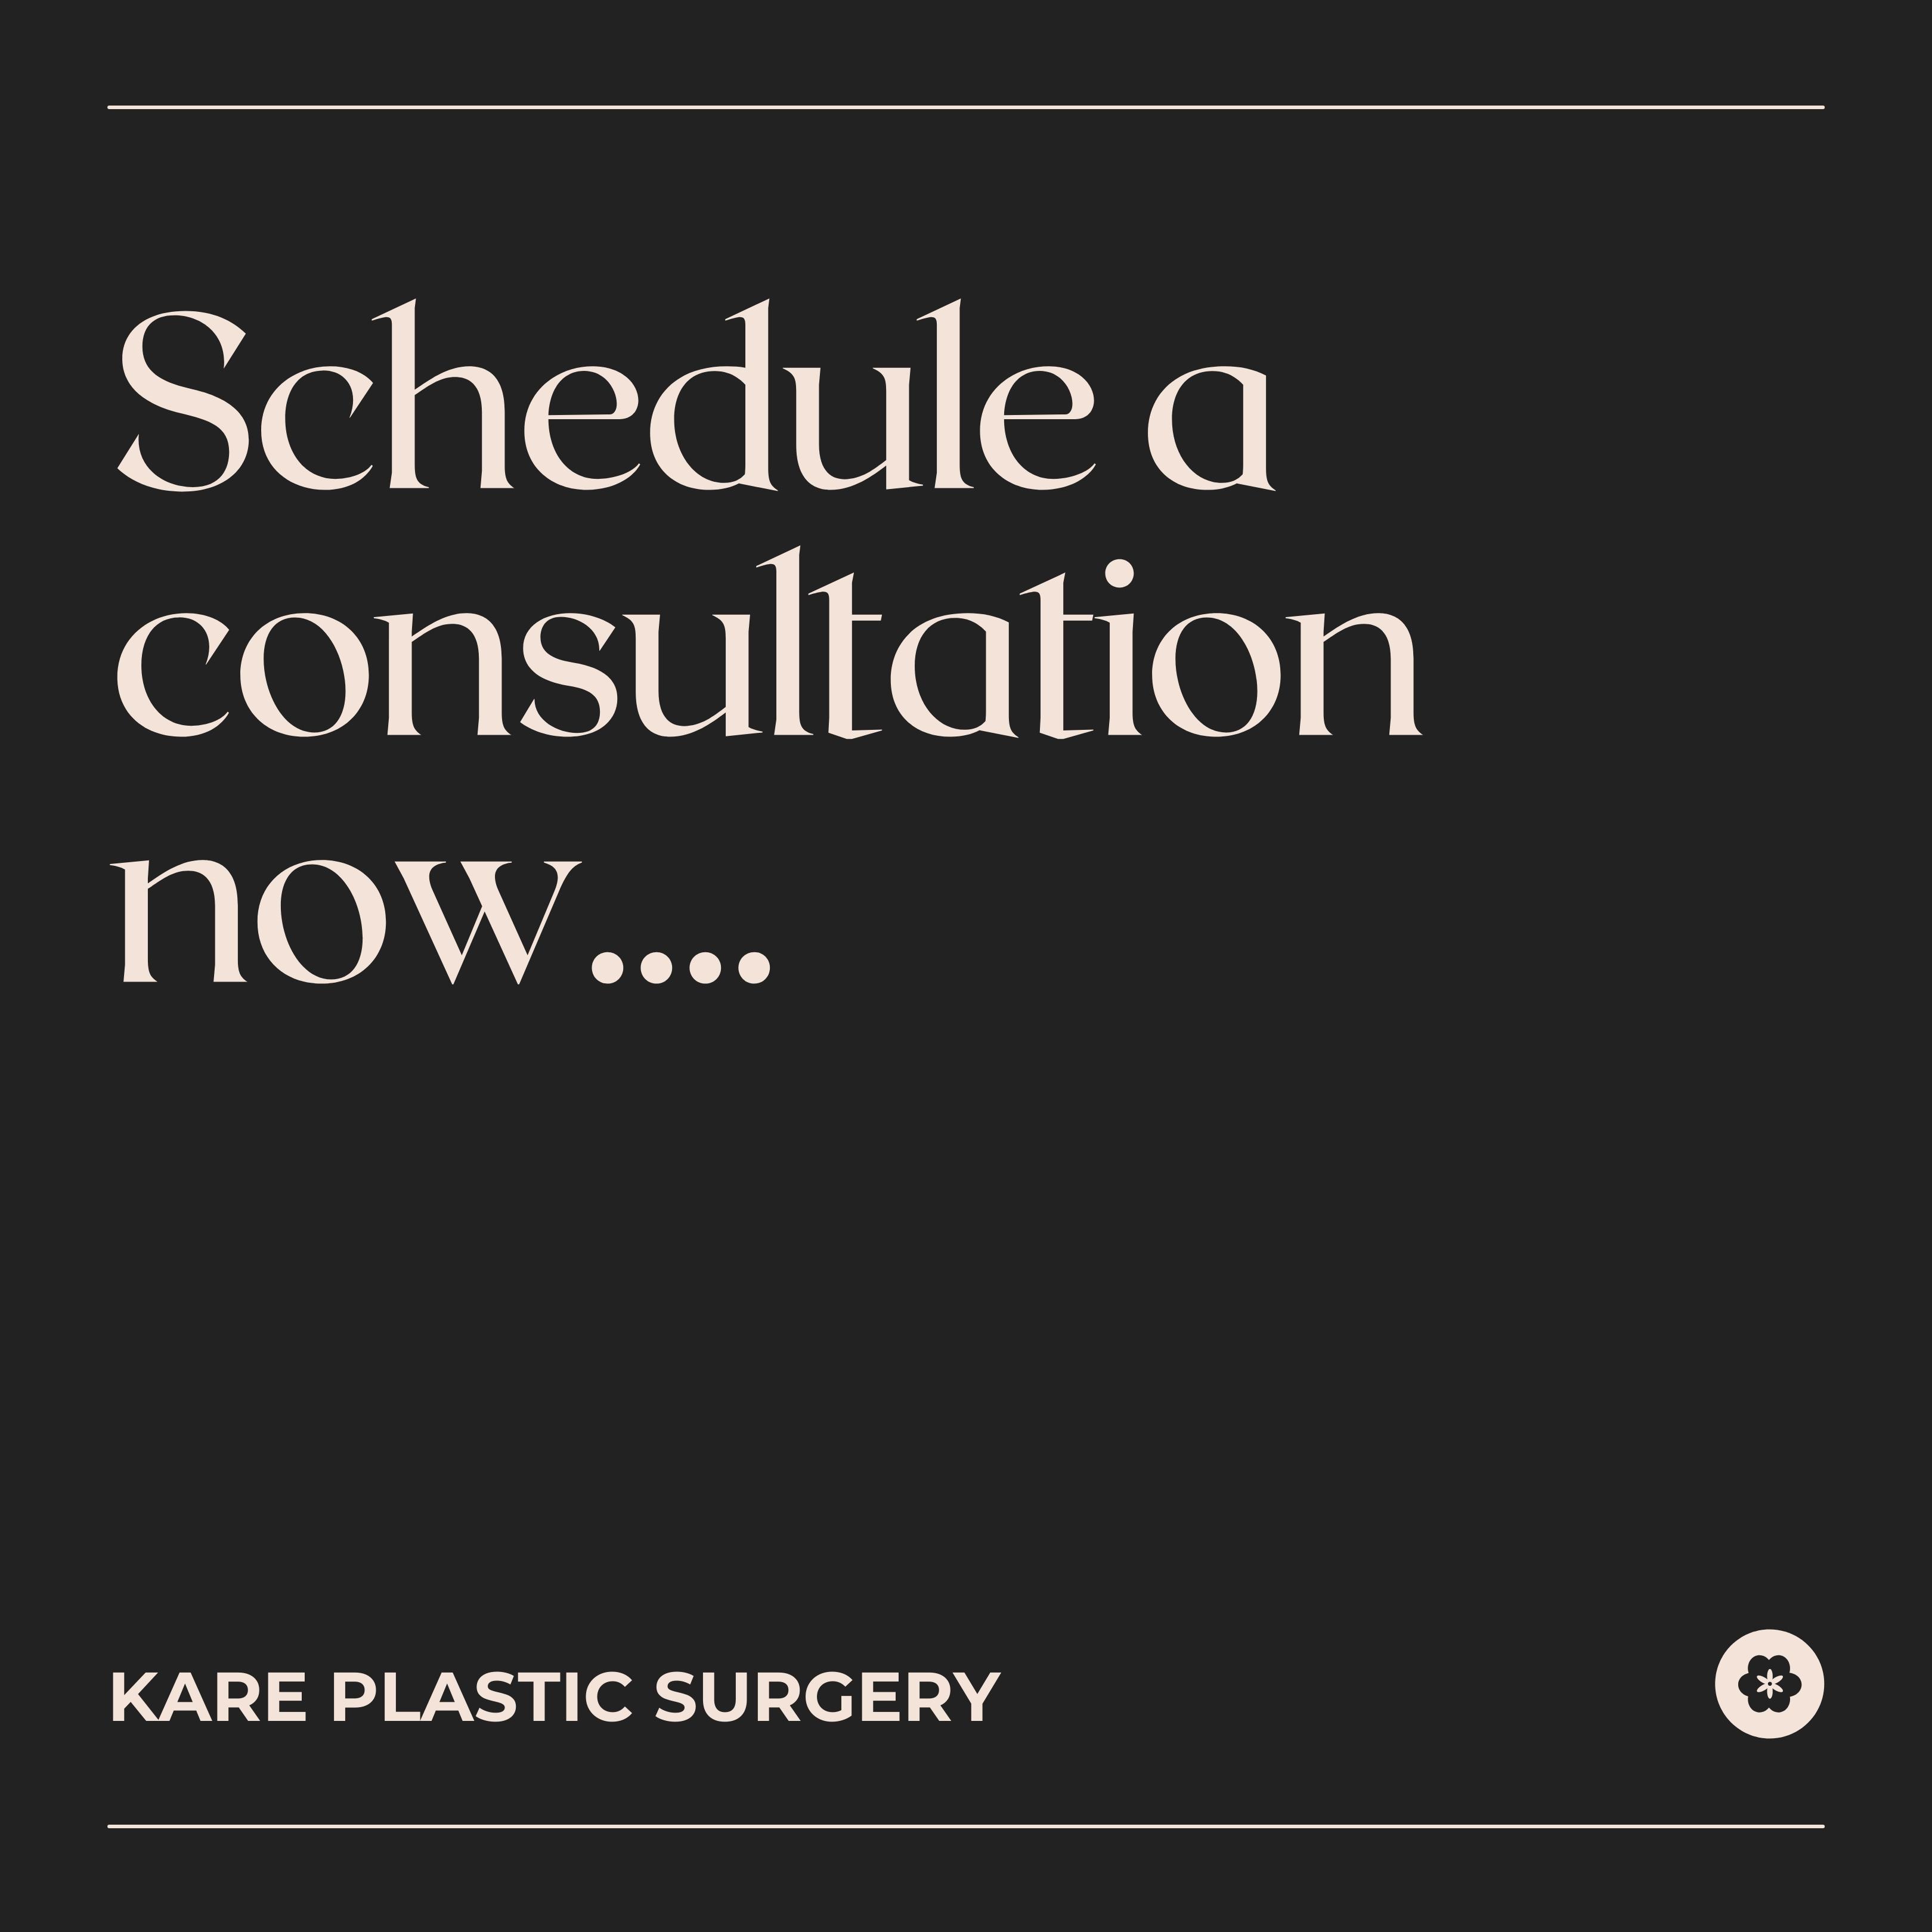 Buccal fat pad removal consultation at Kare Plastic Surgery in Santa Monica